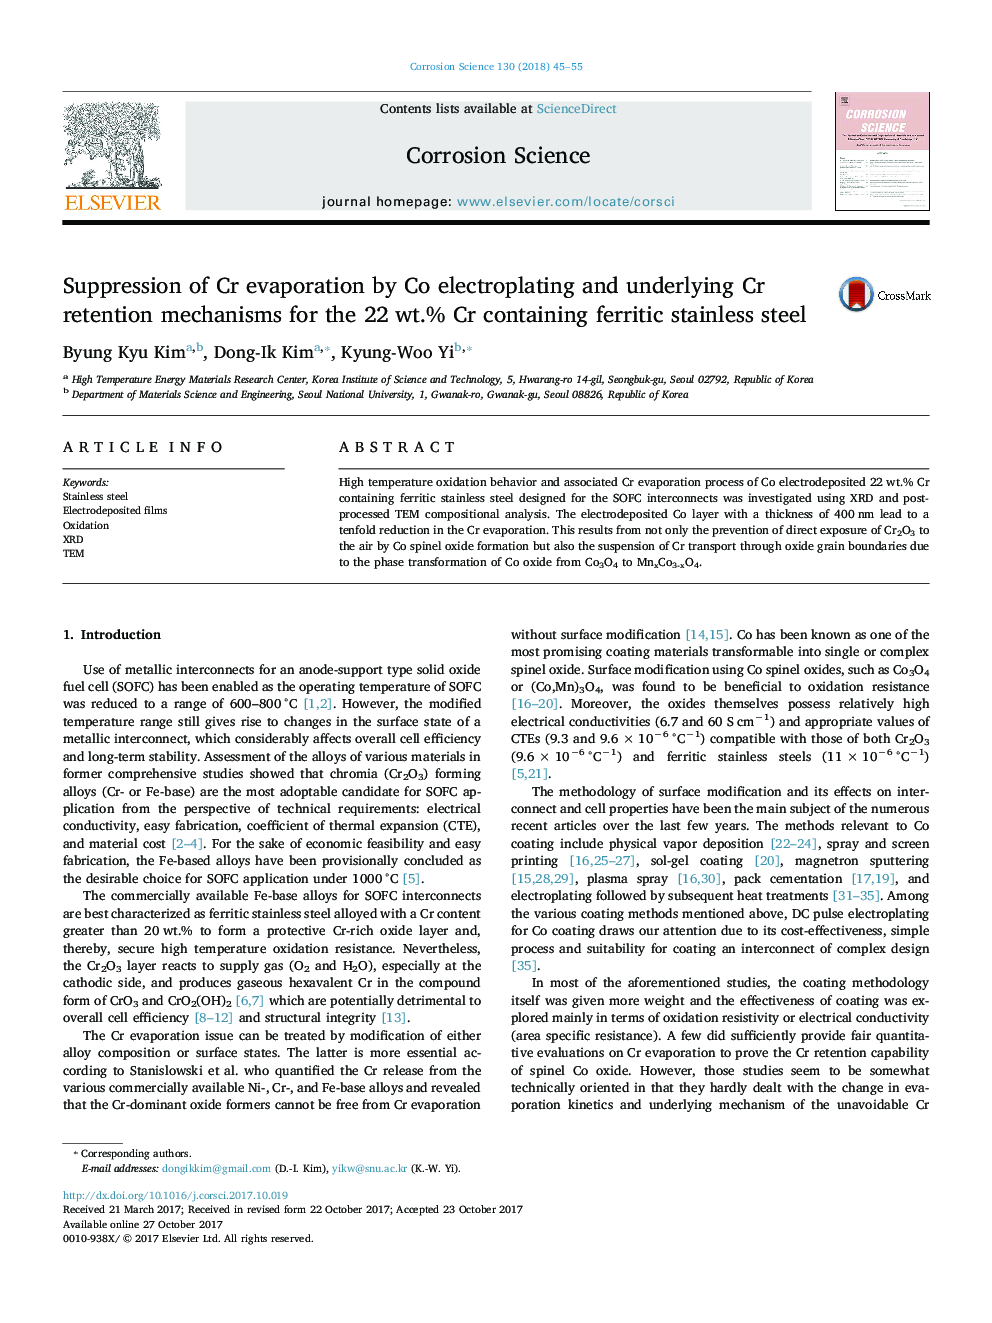 Suppression of Cr evaporation by Co electroplating and underlying Cr retention mechanisms for the 22Â wt.% Cr containing ferritic stainless steel